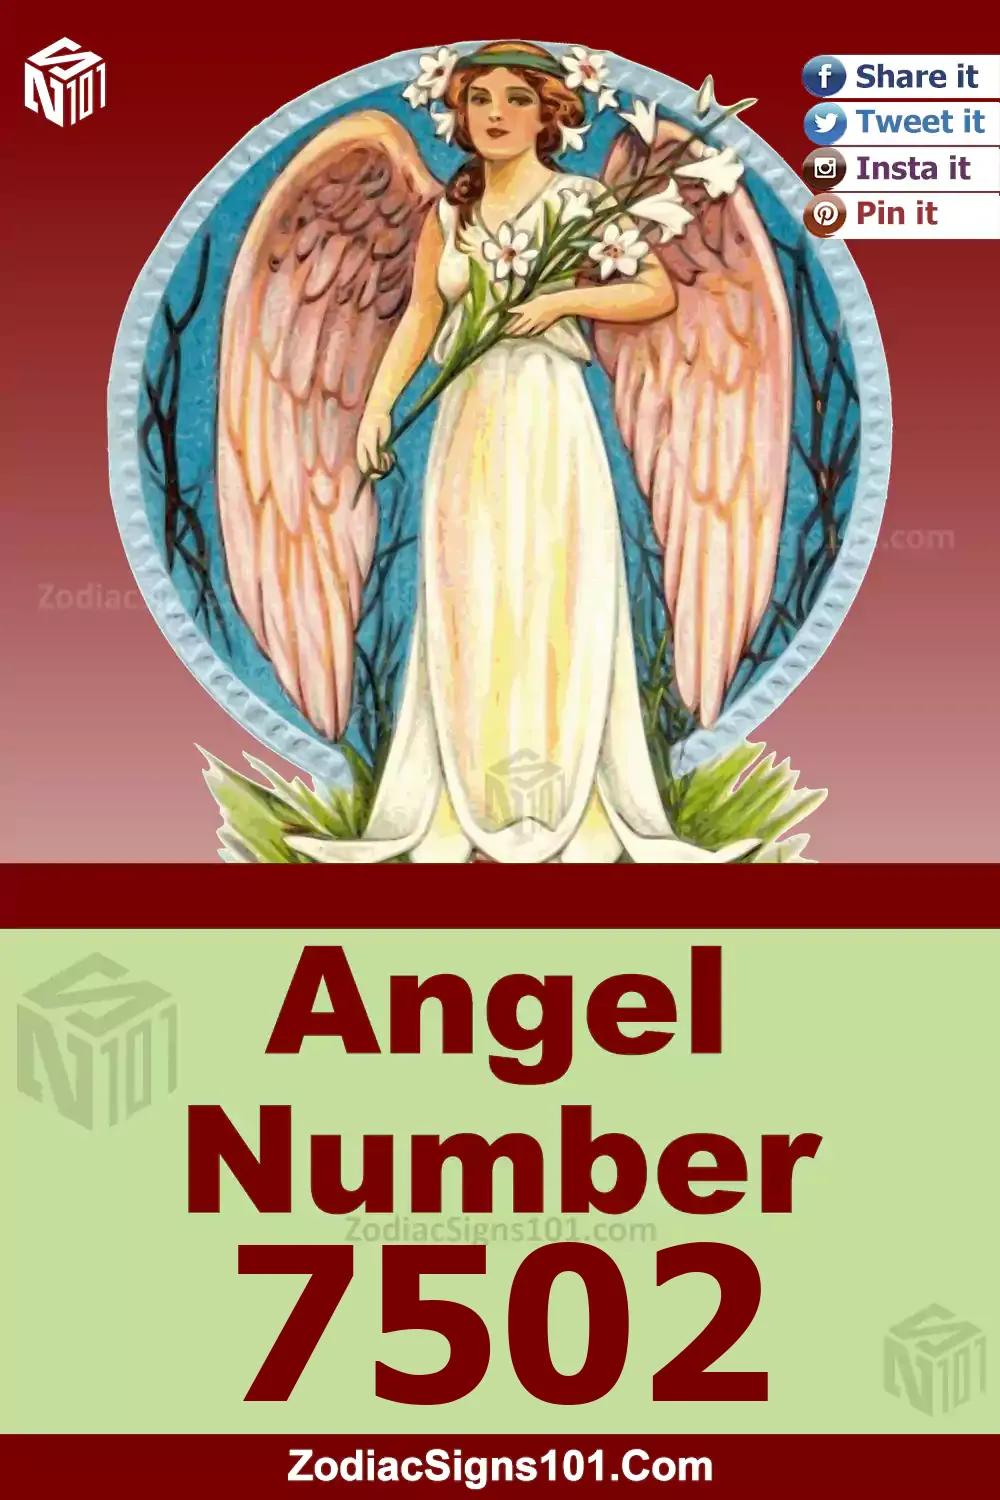 7502 Angel Number Meaning